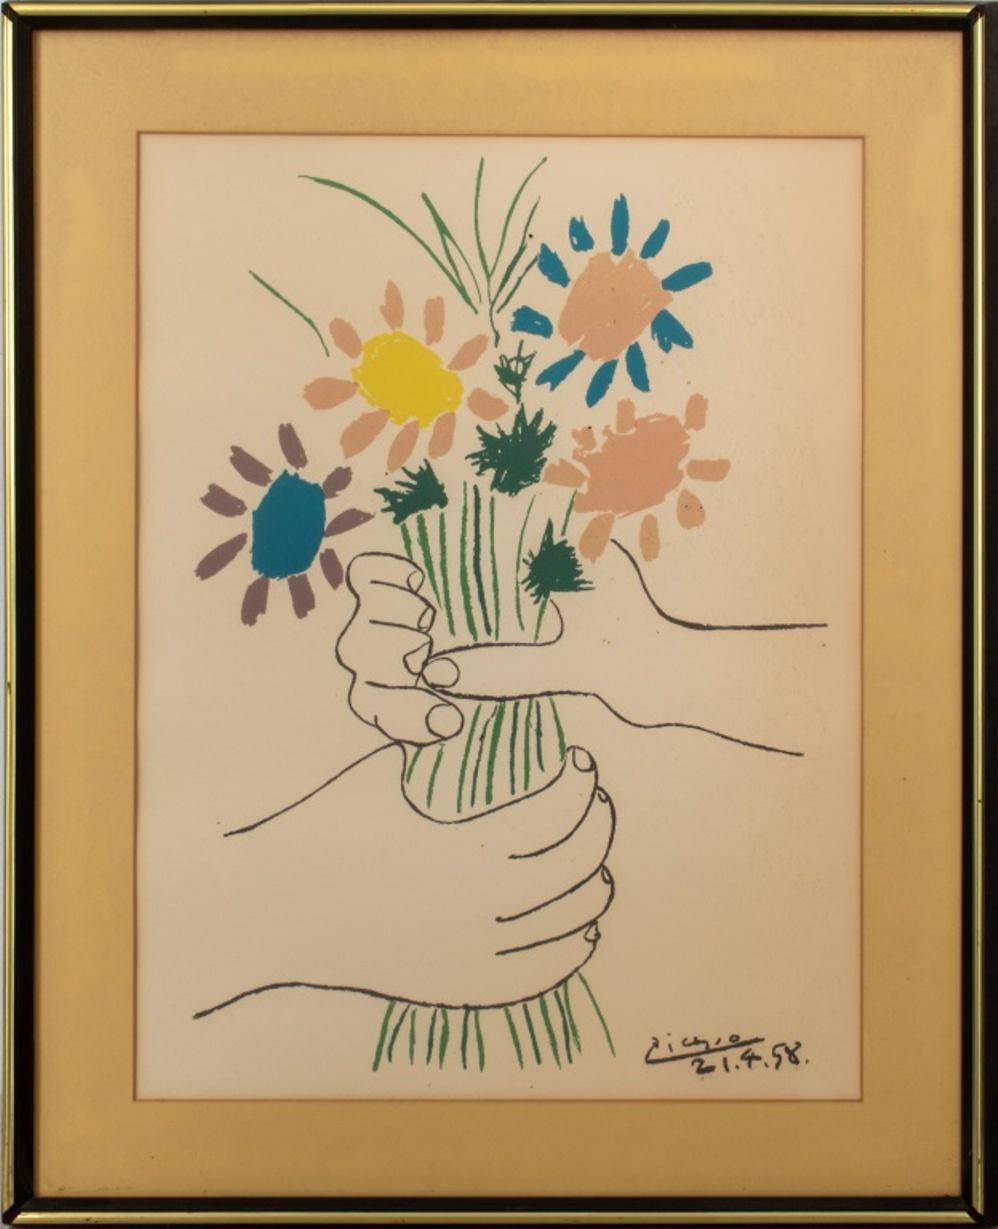 After Picasso "Bouquet of Peace" Lithograph